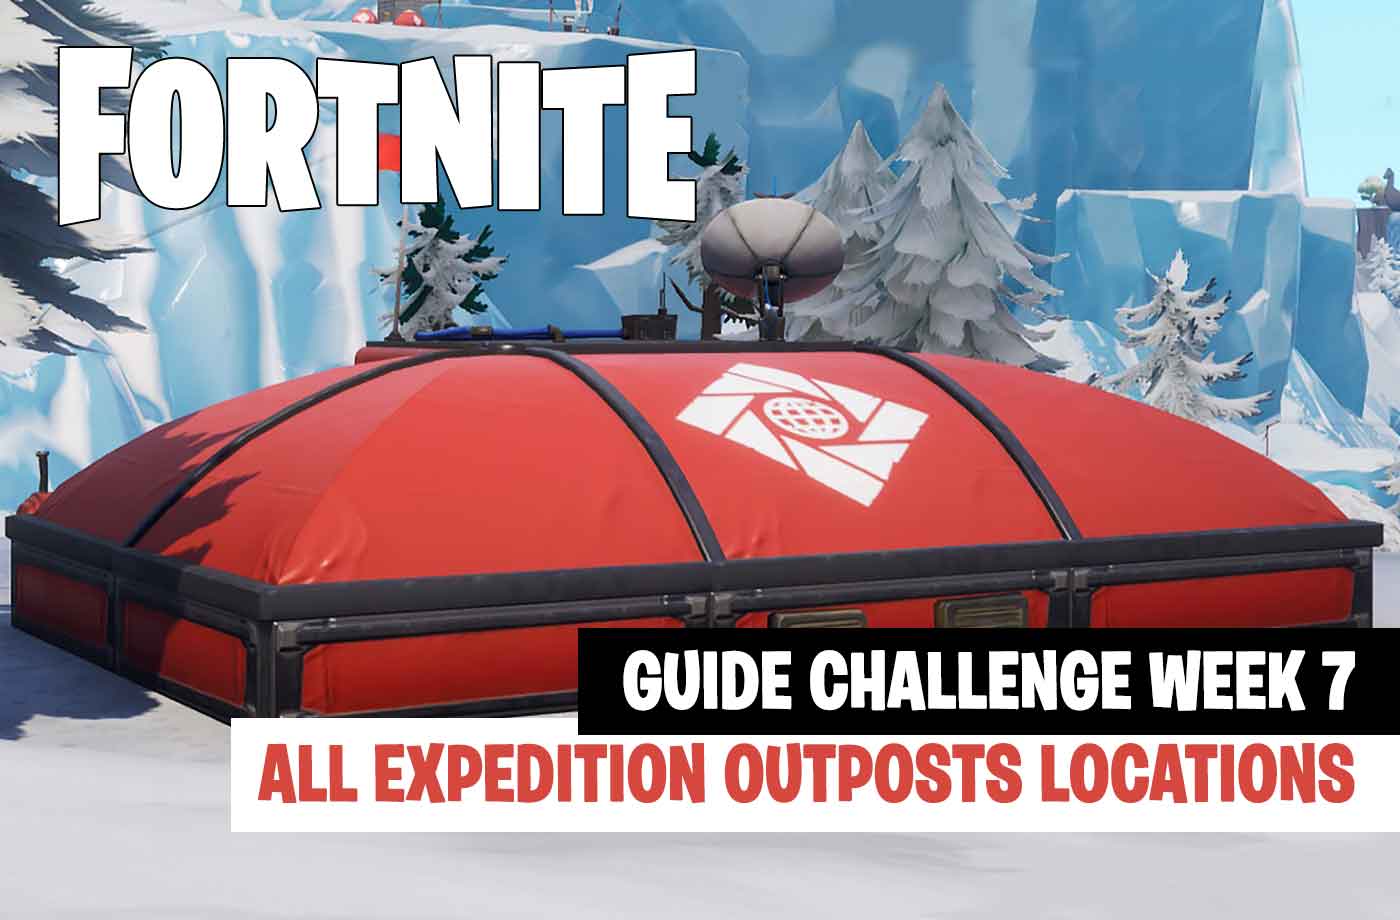 guide fortnite challenge of week 7 where all the expedition outposts are located list for season 7 - expedition outposts fortnite week 4